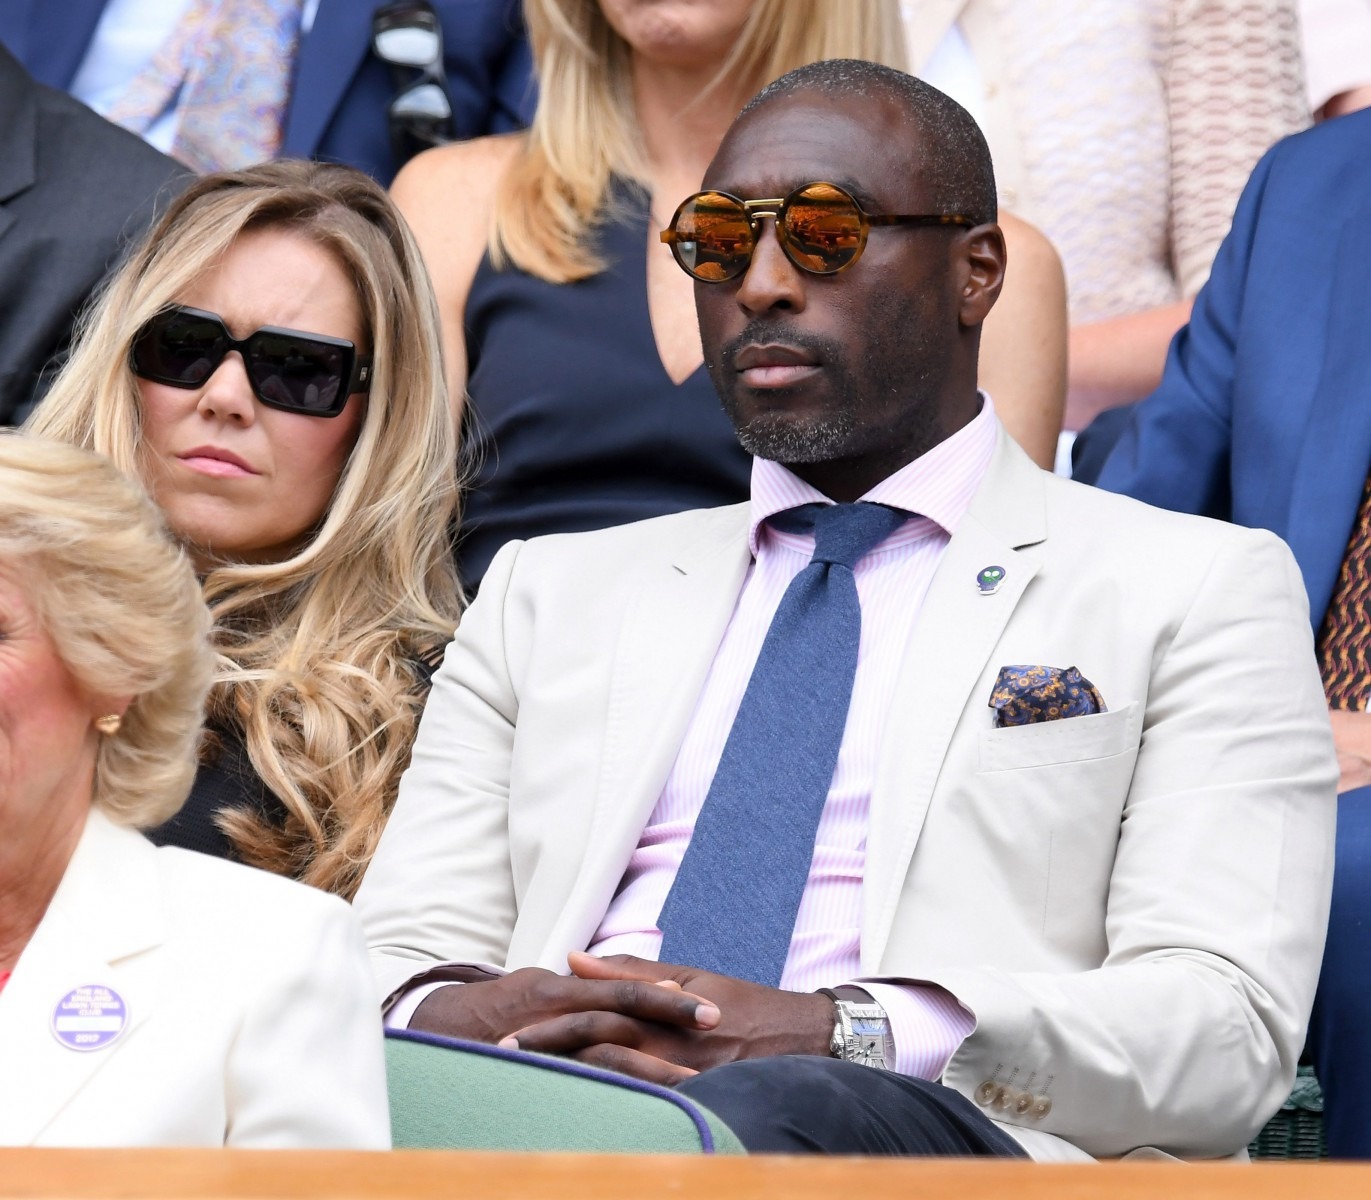 Sol Campbell put the property on the market after Labour proposed a mansion tax that wouldve cost him 250k-per-year